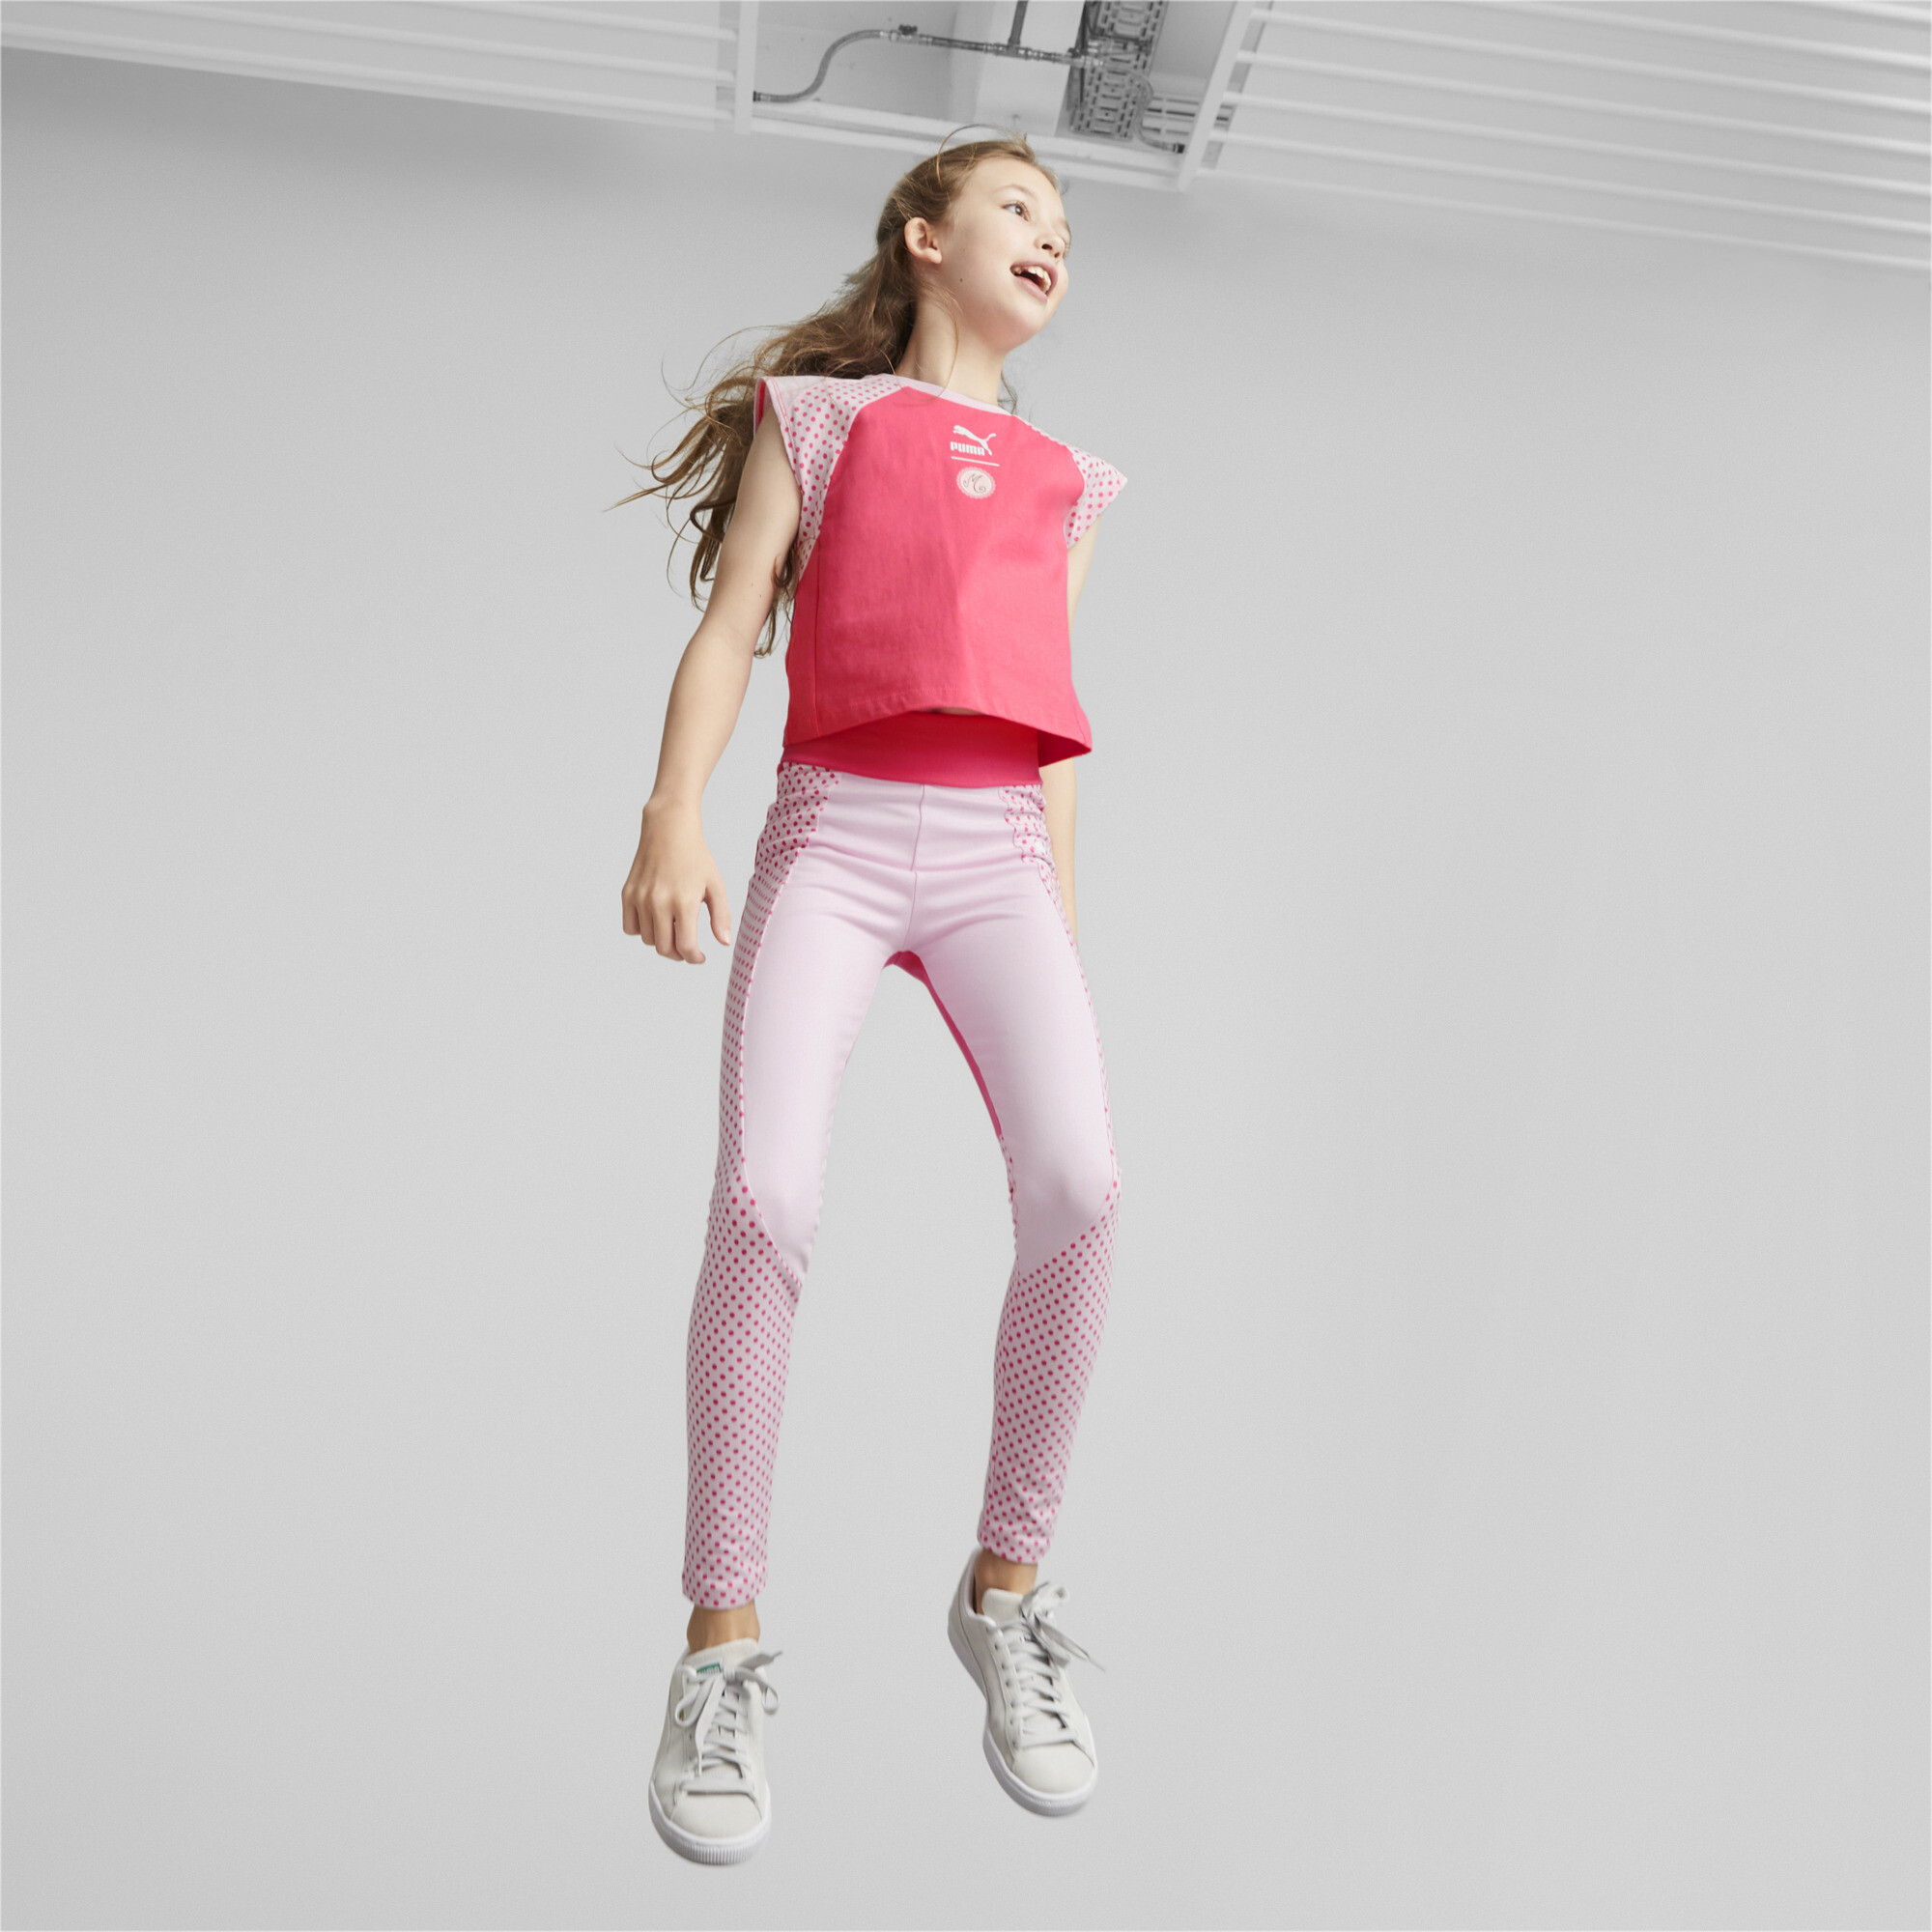 Puma X MIRACULOUS Leggings Youth, Pink, Size 9-10Y, Clothing